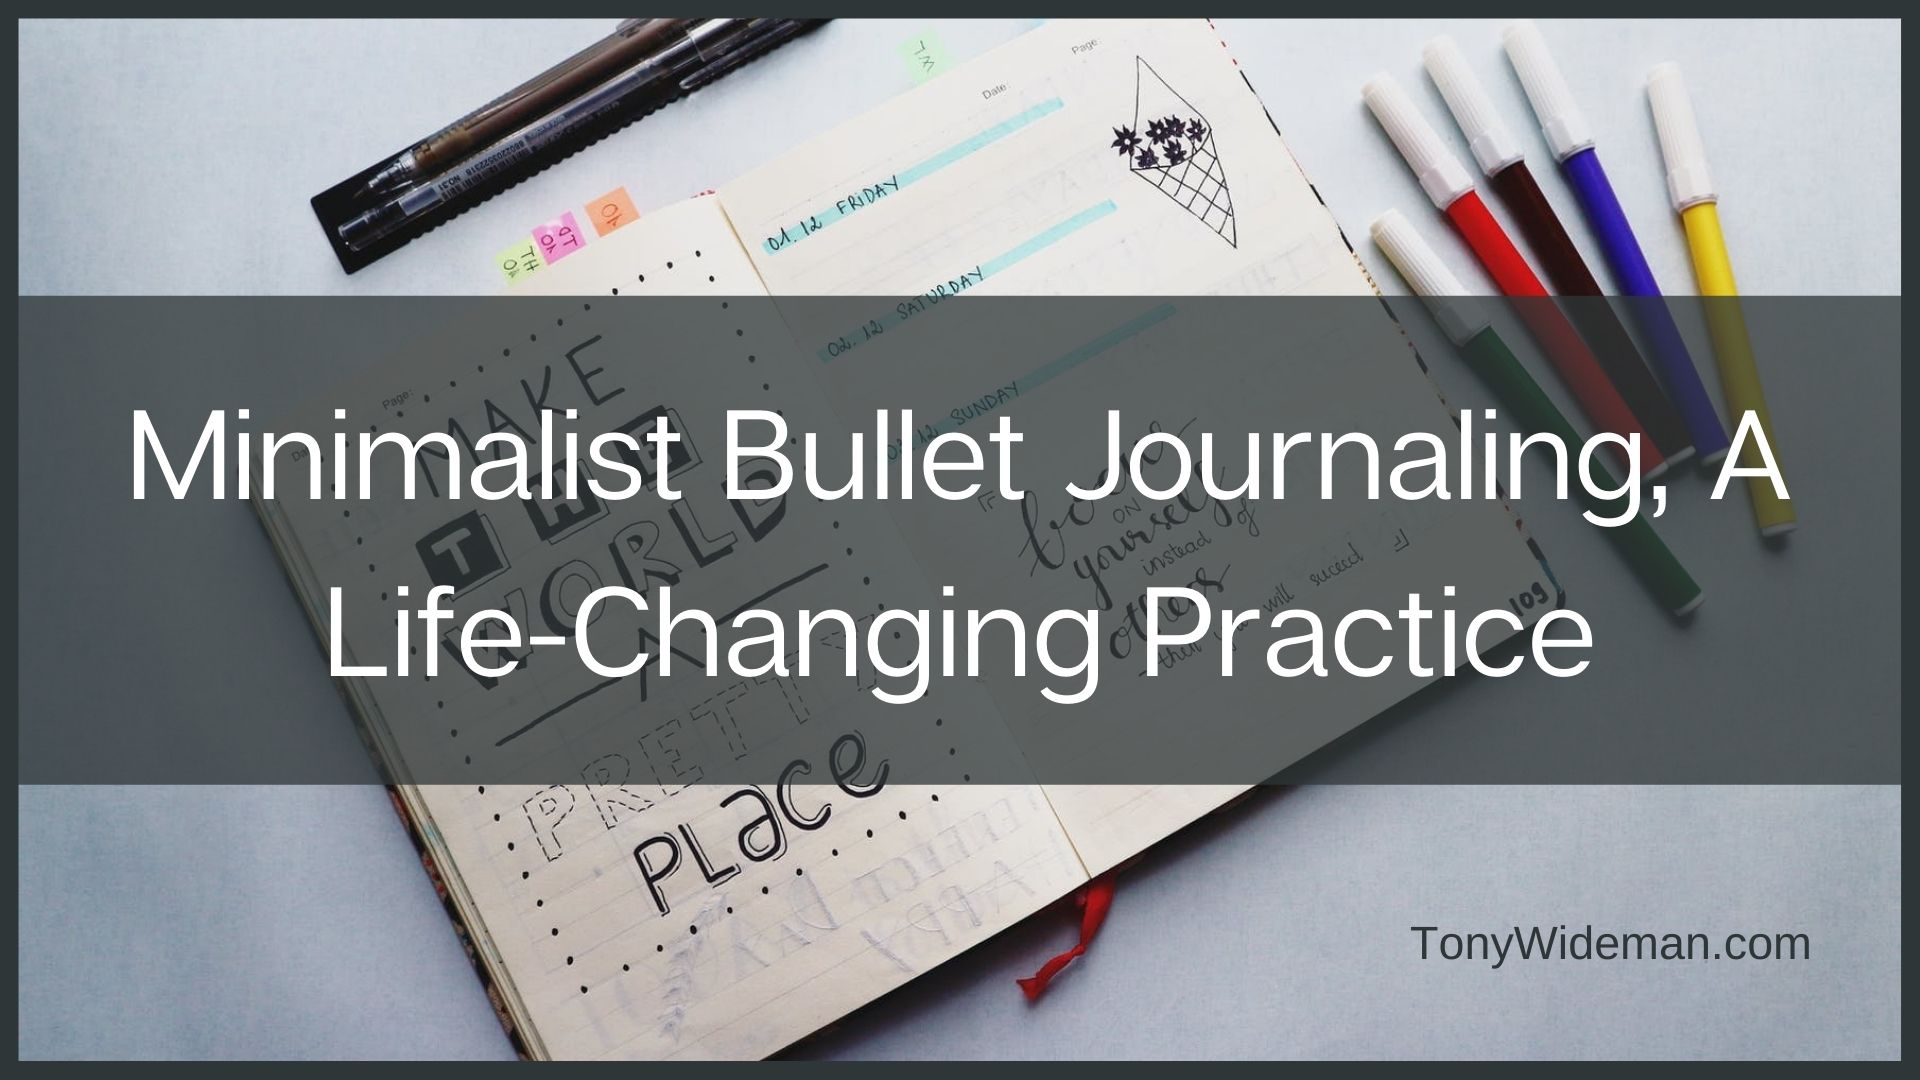 Minimalist Bullet Journaling, A Life-Changing Practice